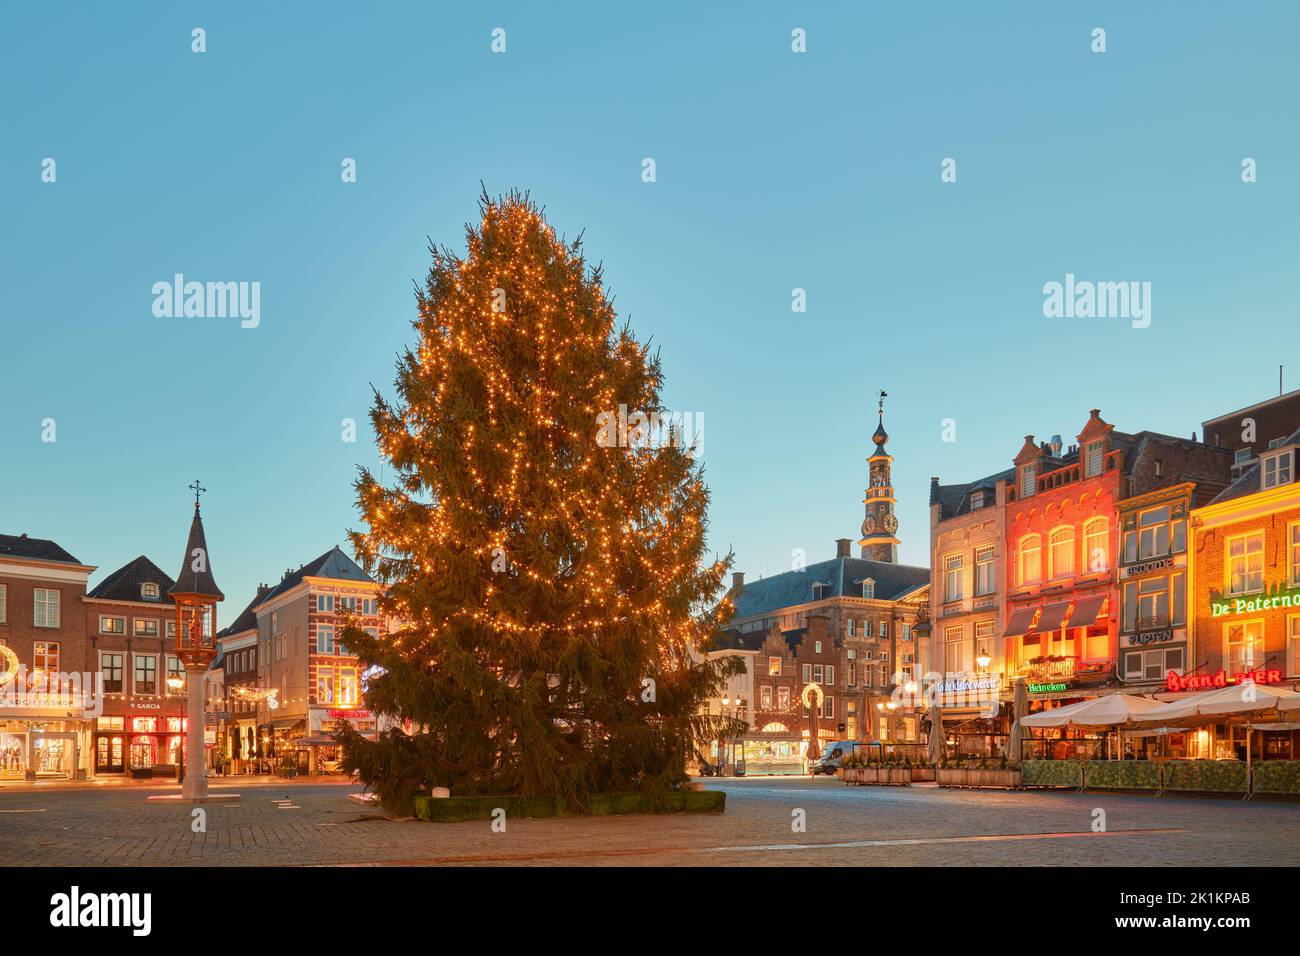 Den bosch, The Netherlands - December 21, 2021: Large christmas tree with lights on the central square 'Markt' surrounded by pubs, restaurants and sho Stock Photo